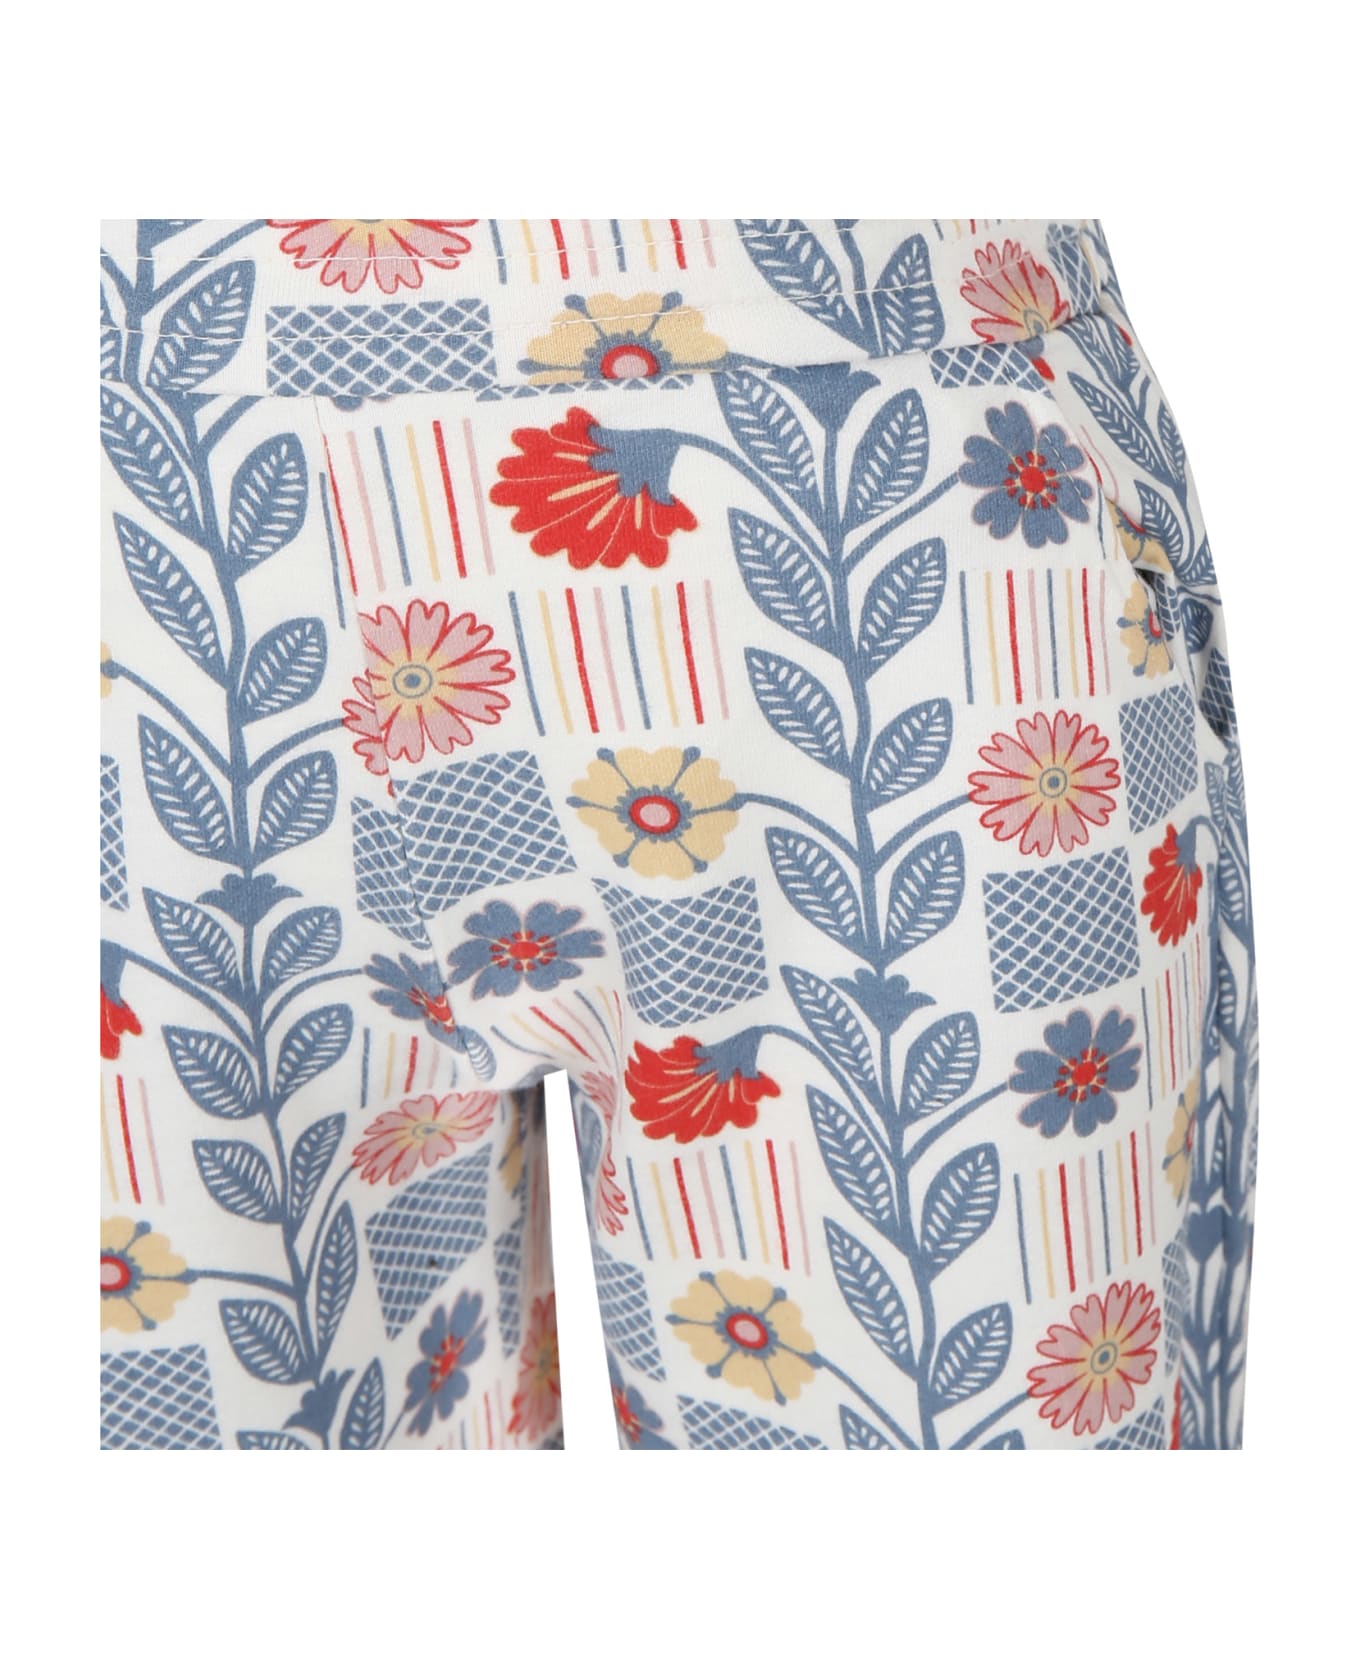 Coco Au Lait White Trousers For Girl With Flowers Print - Multicolor